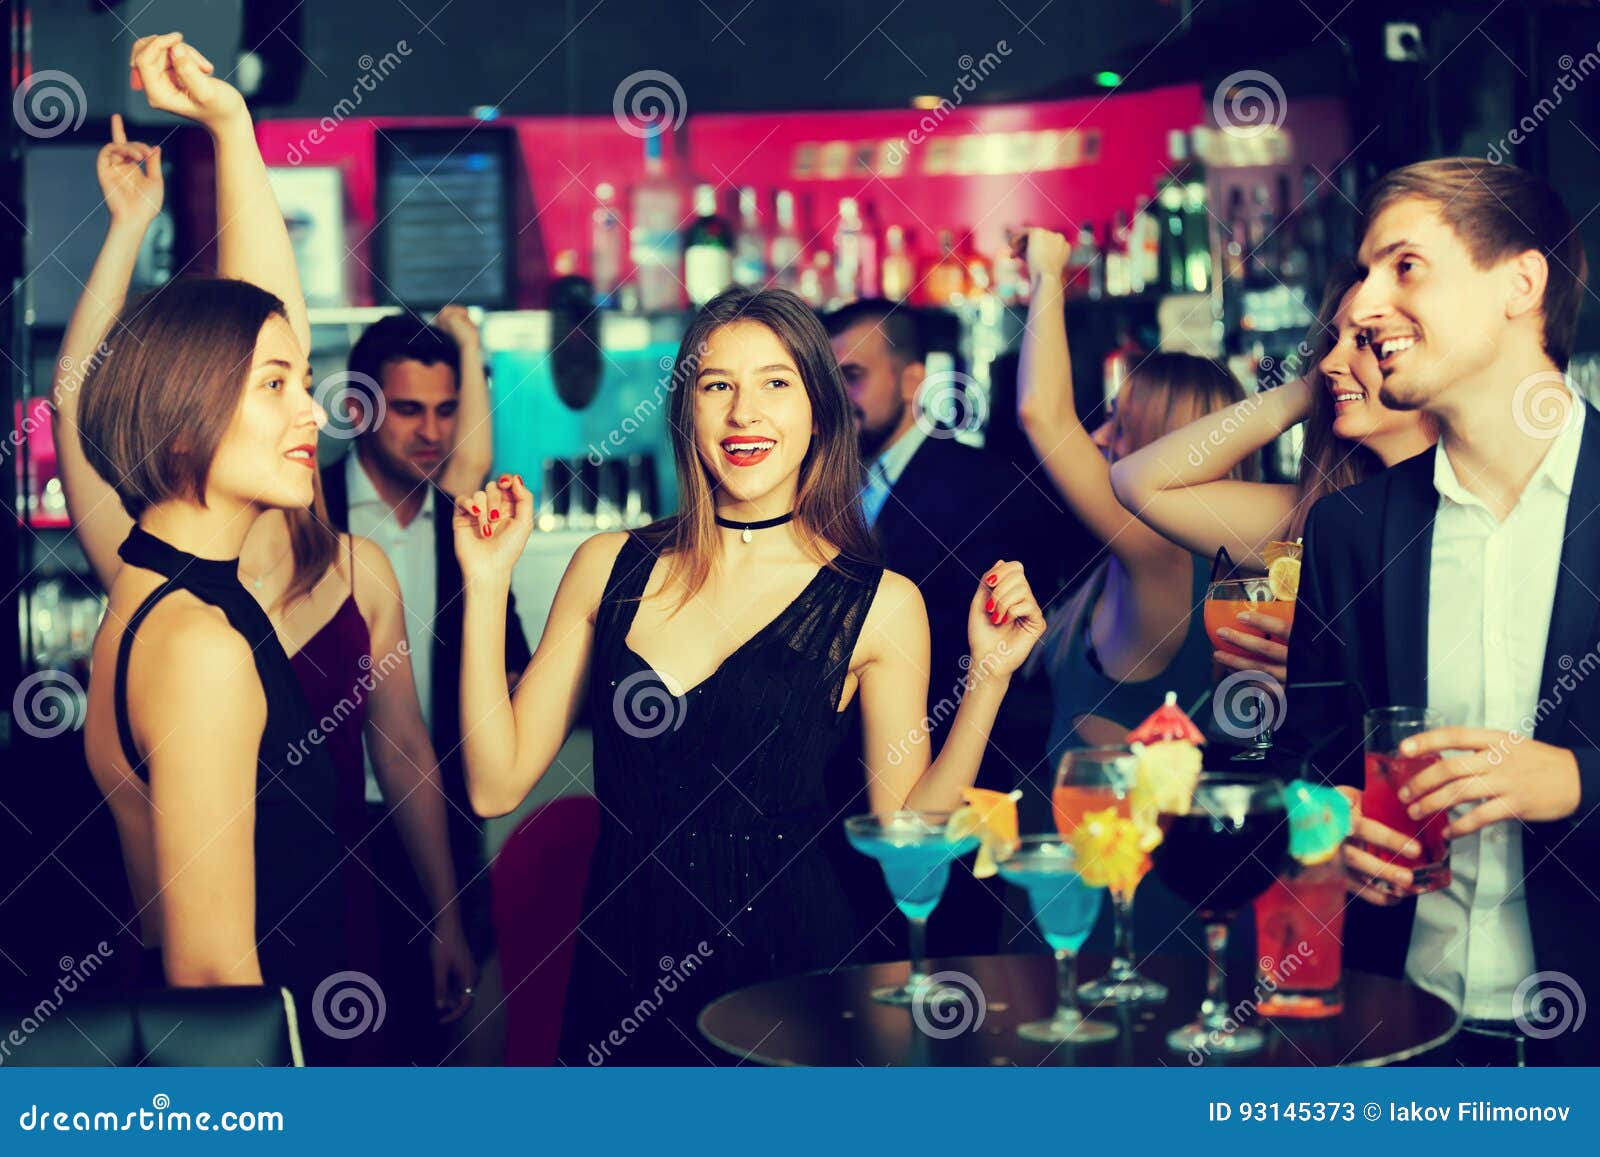 Friendly Colleagues Dancing on Corporate Party Stock Image - Image of ...